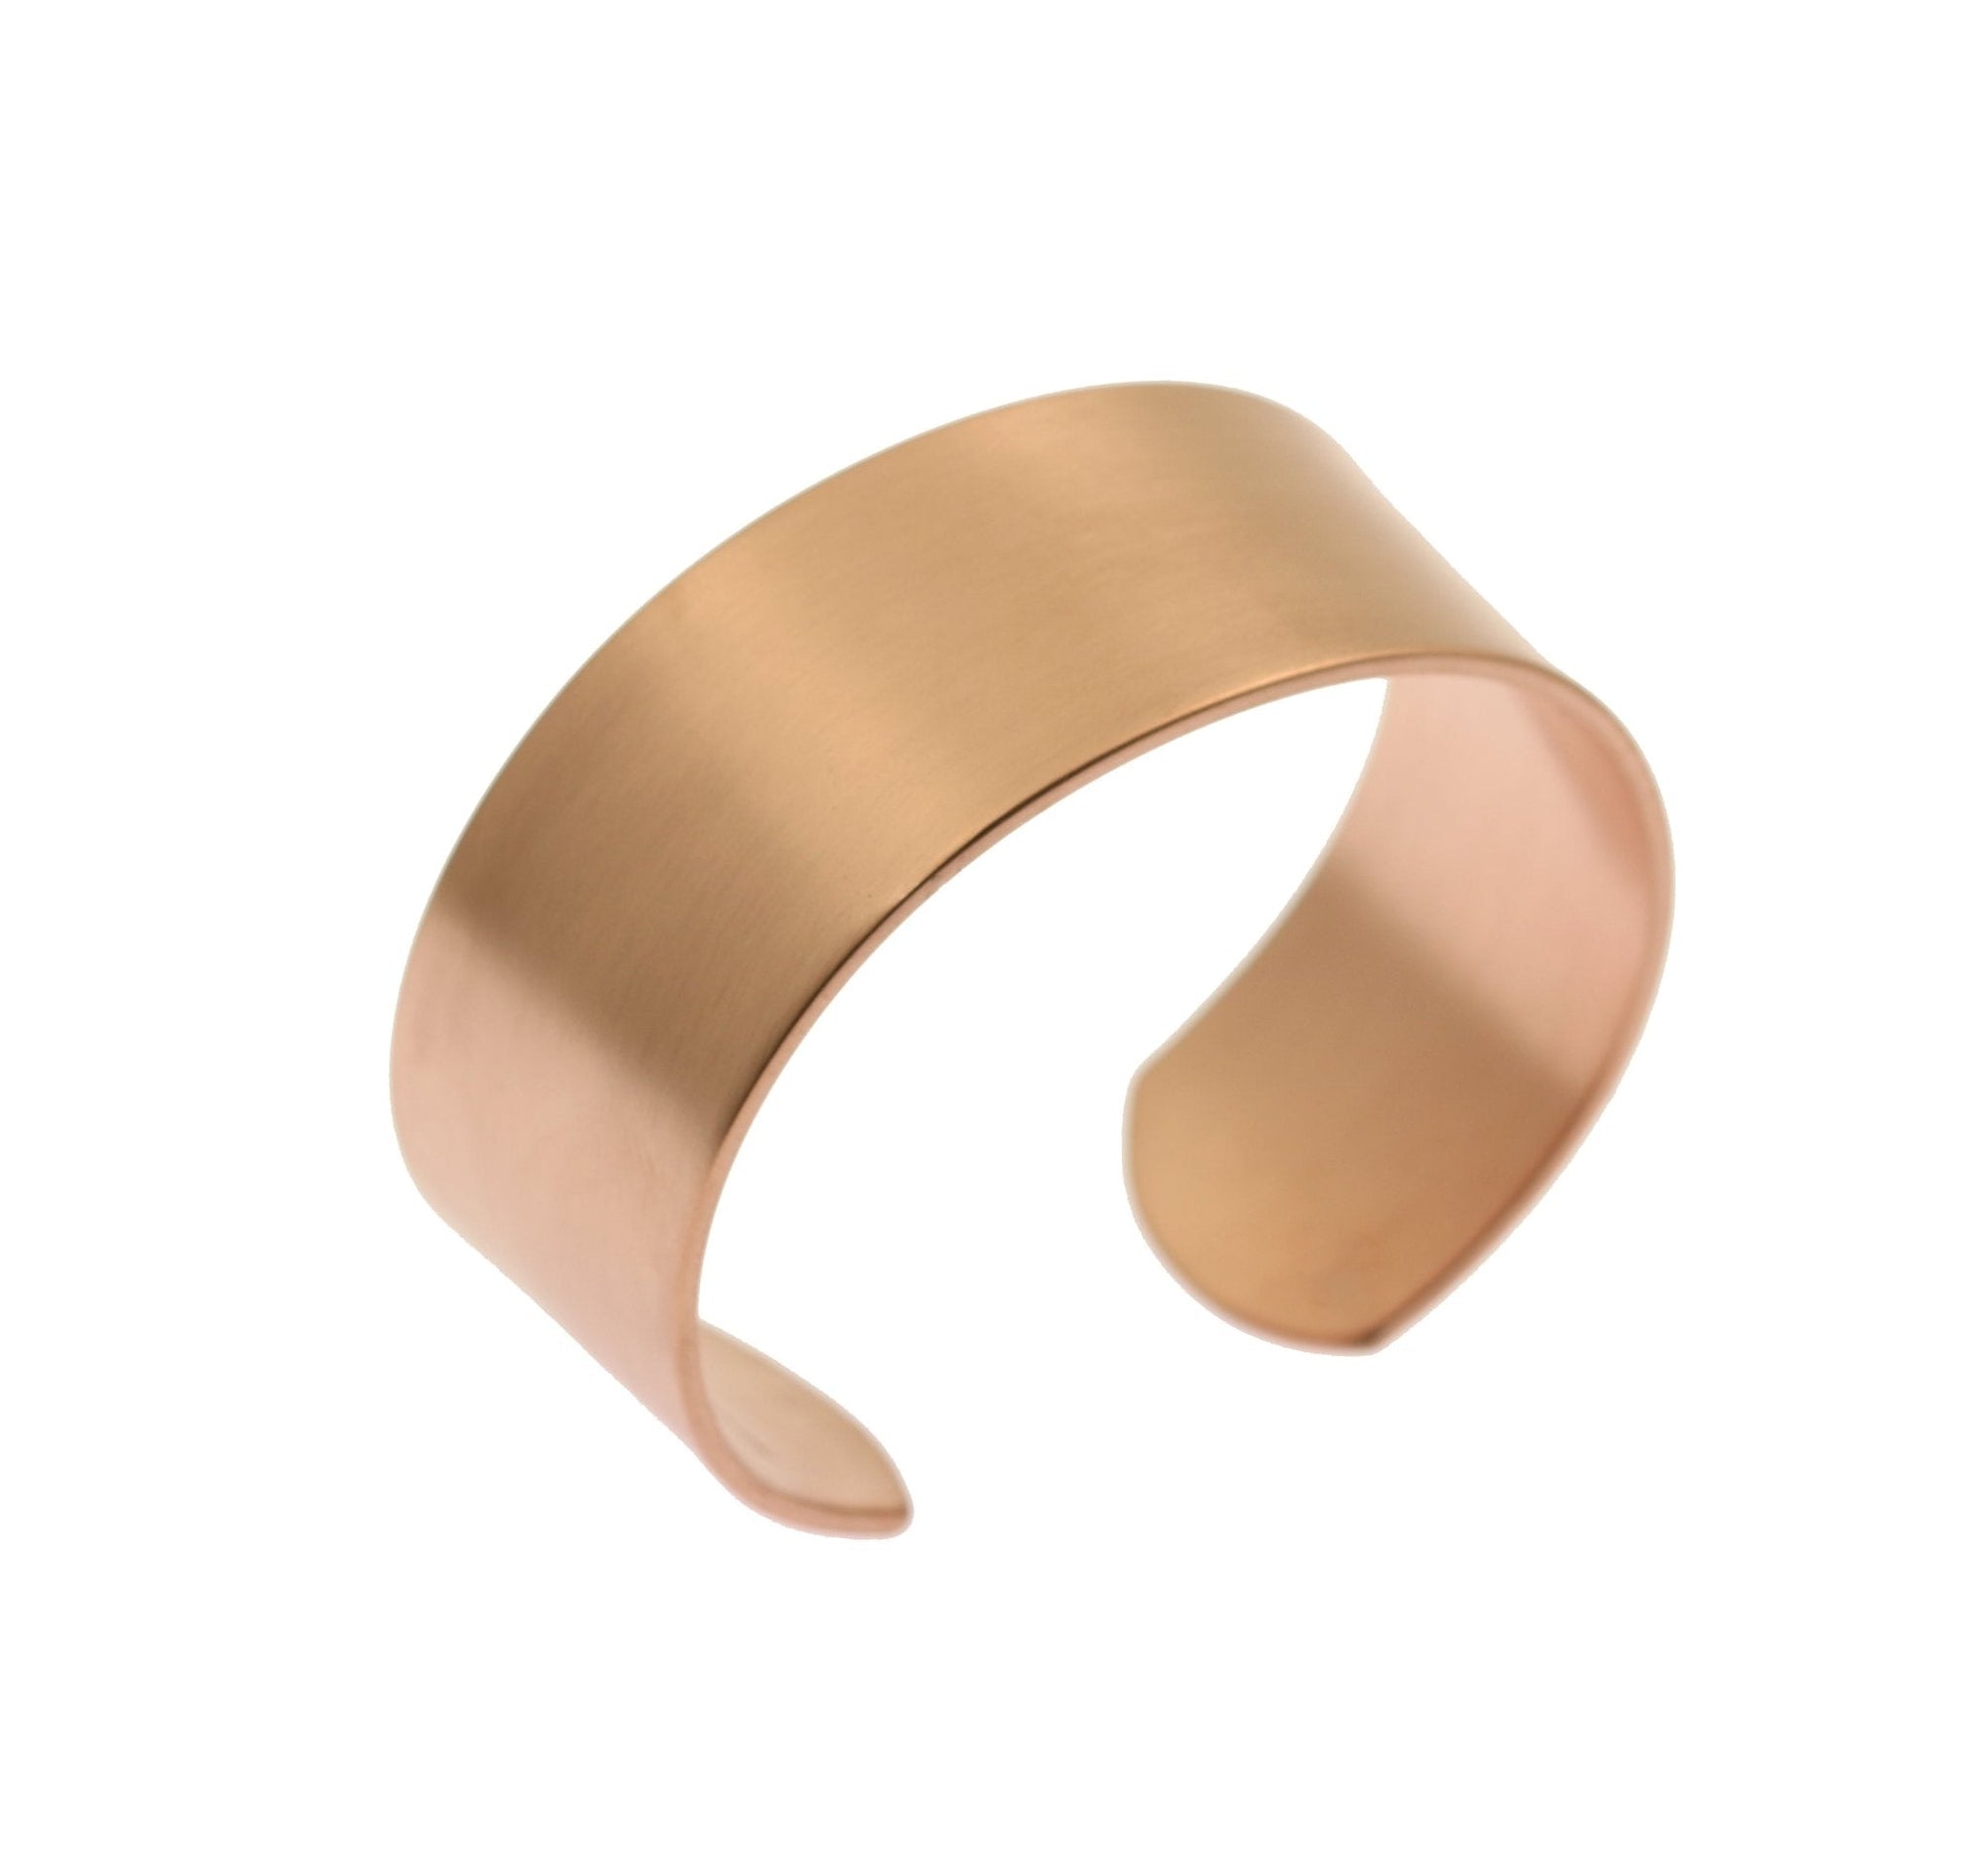 Left View of 1 Inch Wide Men's Brushed Copper Cuff Bracelet